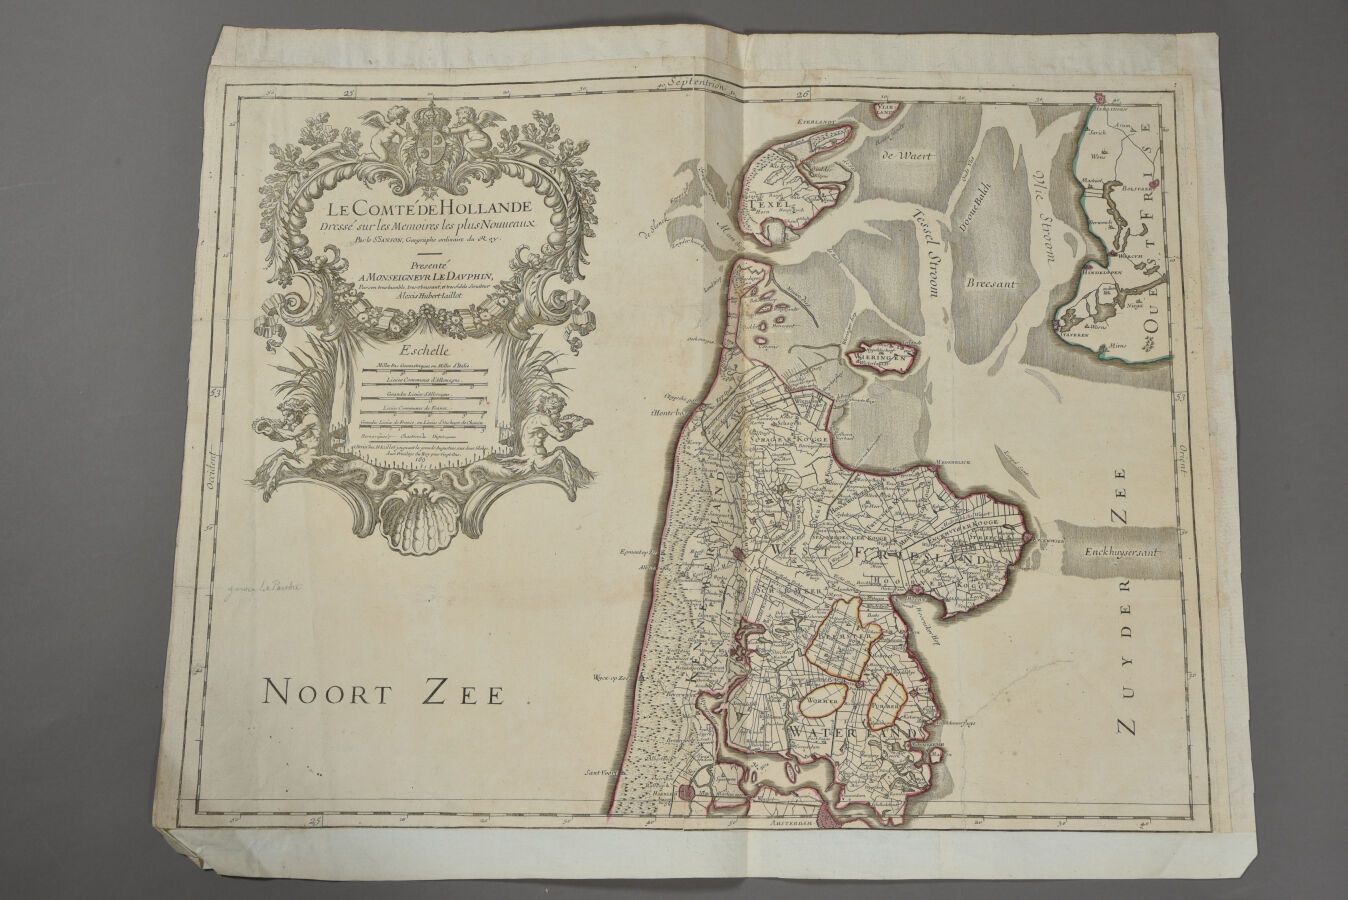 Null Hubert JAILLOT (1632 - 1712)
Map of the county of Holland. About 1700. 
Dou&hellip;